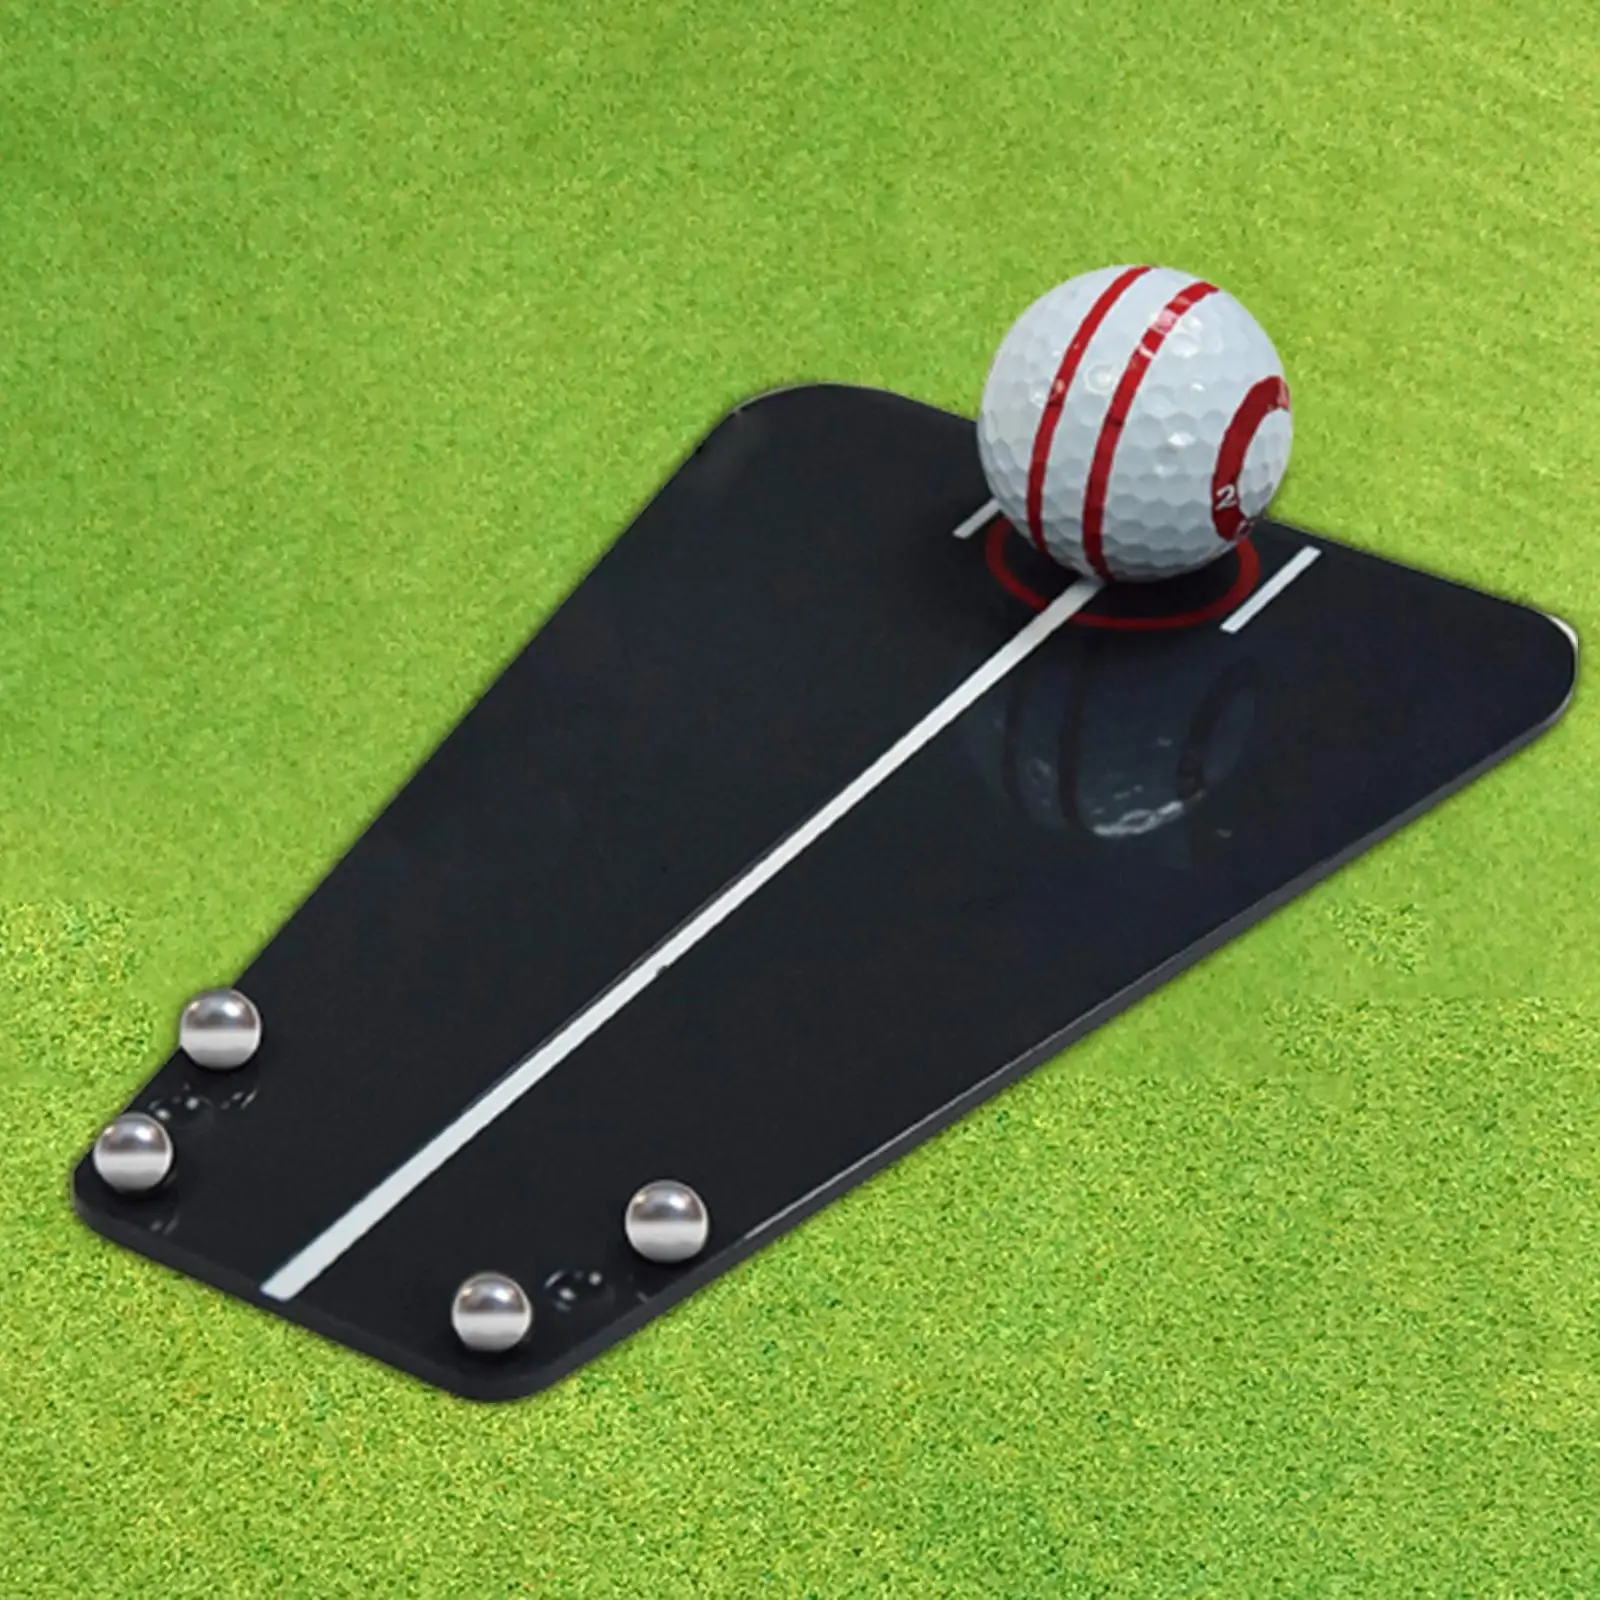 Golf Putting Tutor Swing Trainer Practice Portable Golf Putting Aid Improve Putting Skills for Indoor Outdoor Sports